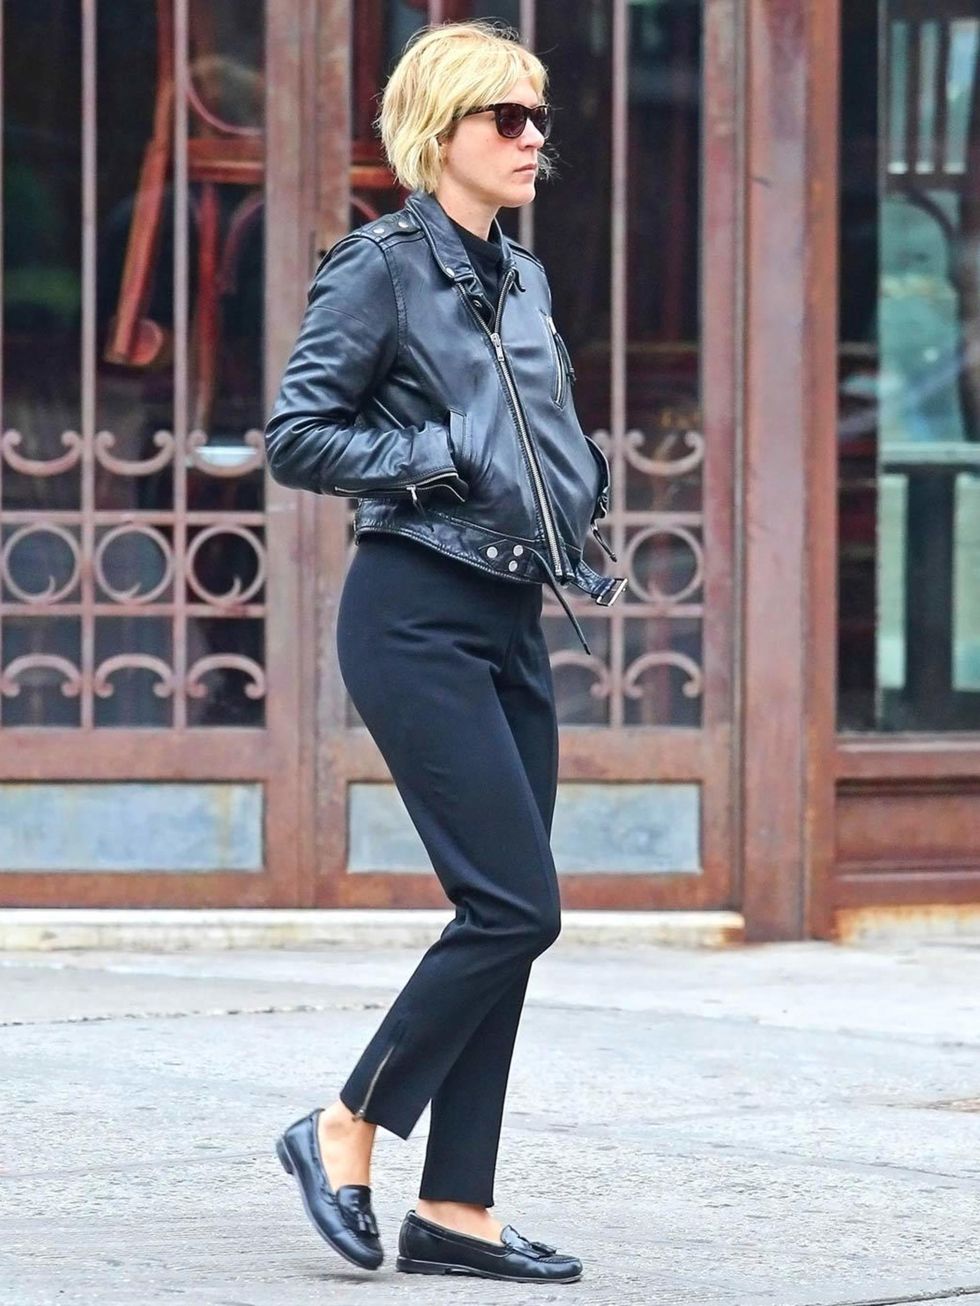 <p><a href="http://www.elleuk.com/star-style/celebrity-style-files/chloe-sevigny">Chloe Sevigny</a> teaming her biker jacket with androgynous mix of loafers and tailored trousers</p>